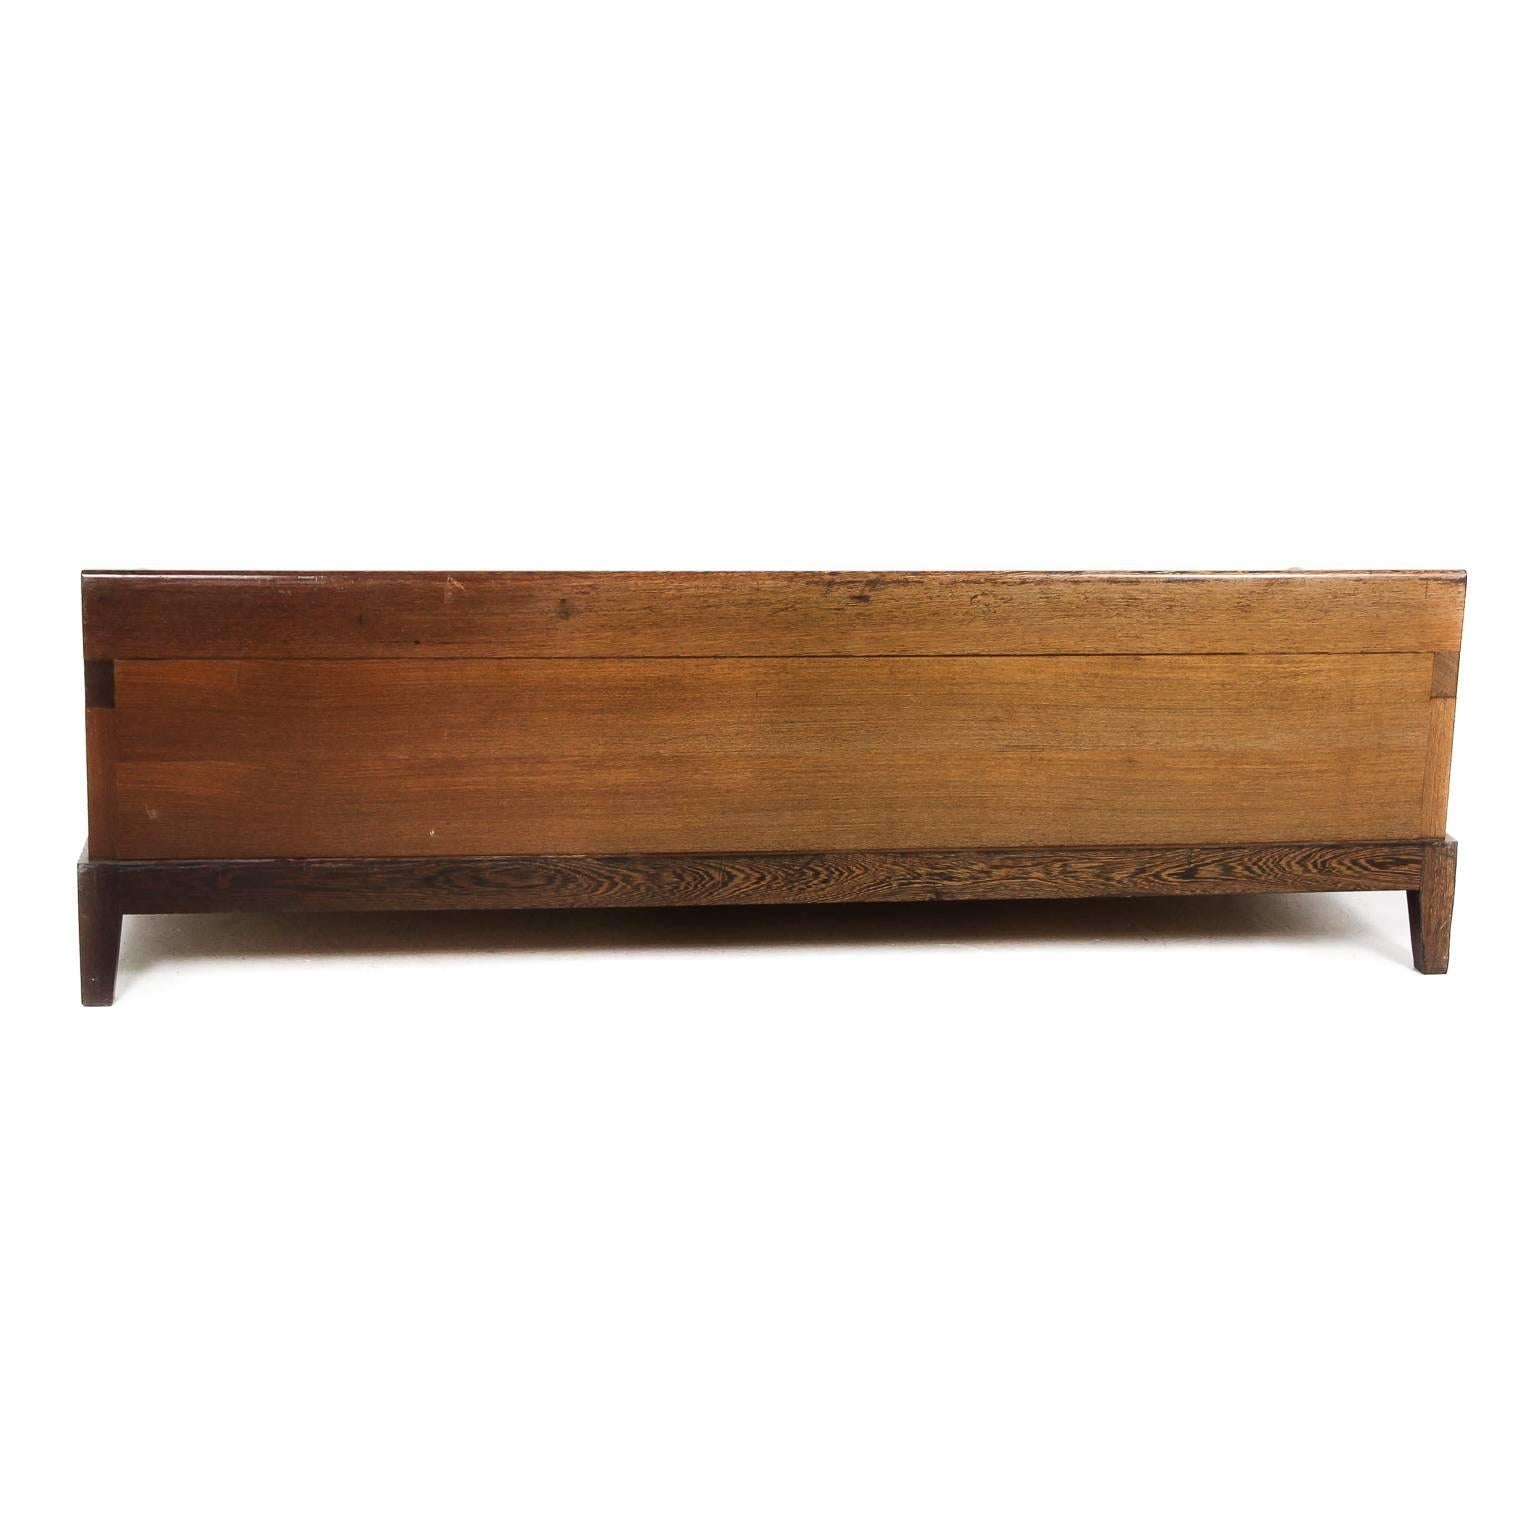 20th Century Vintage Original ‘Opium Bed’ in African Wenge Wood by Christian Liagre, C.1980